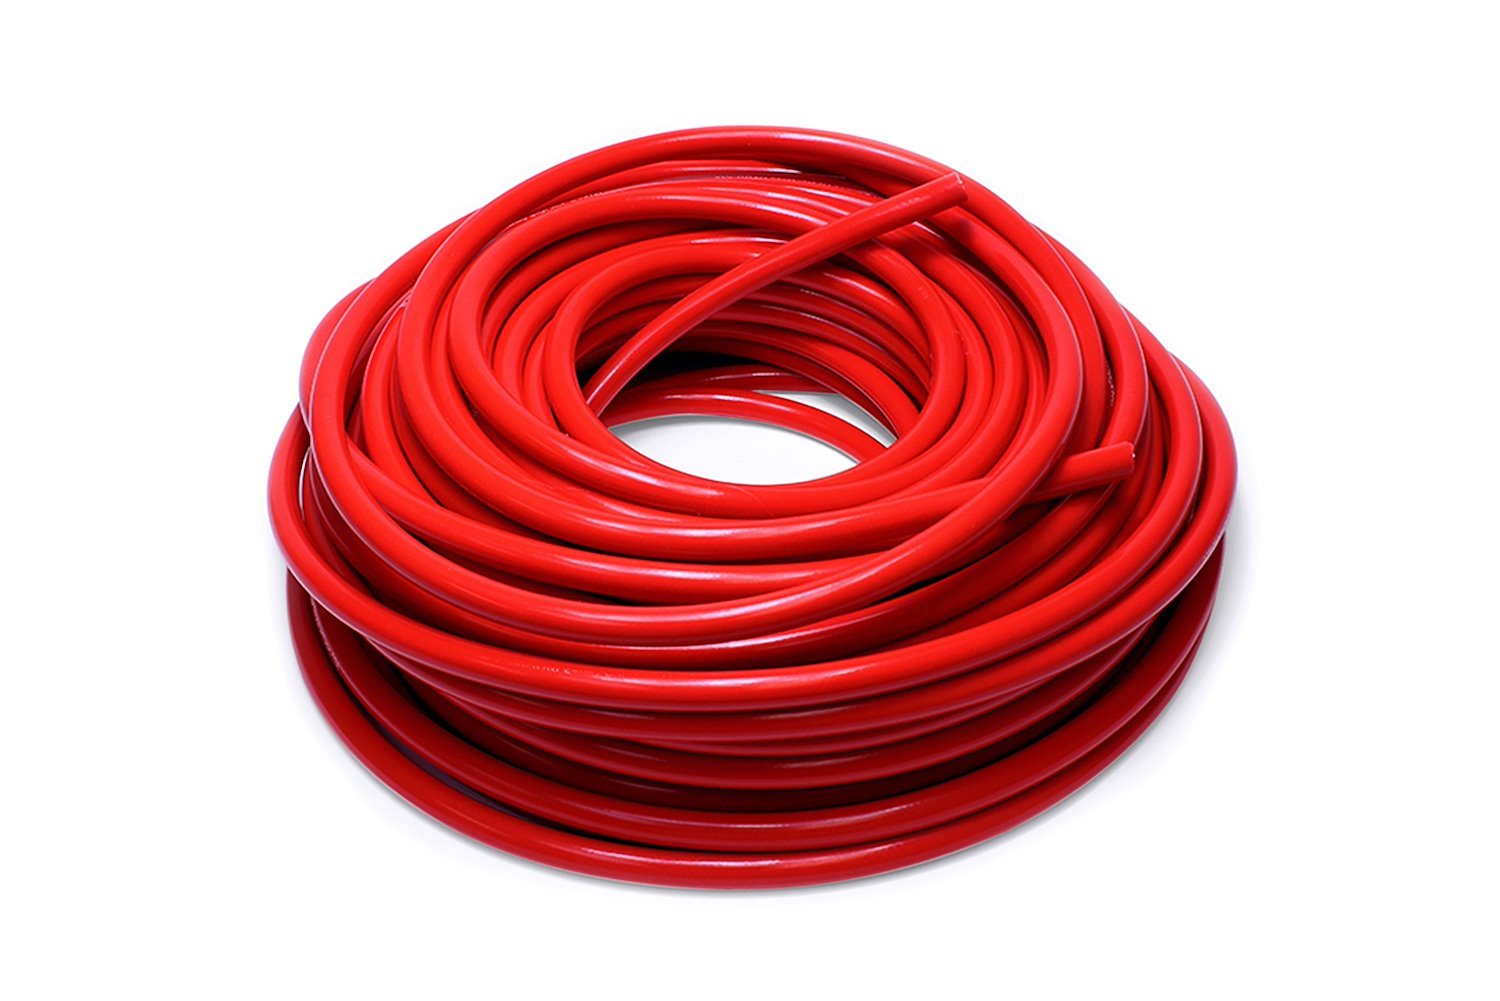 HTHH-013-REDx25 Silicone Heater Hose Tubing, High-Temp Reinforced, 1/8 in. ID, 25 ft. Roll, Red